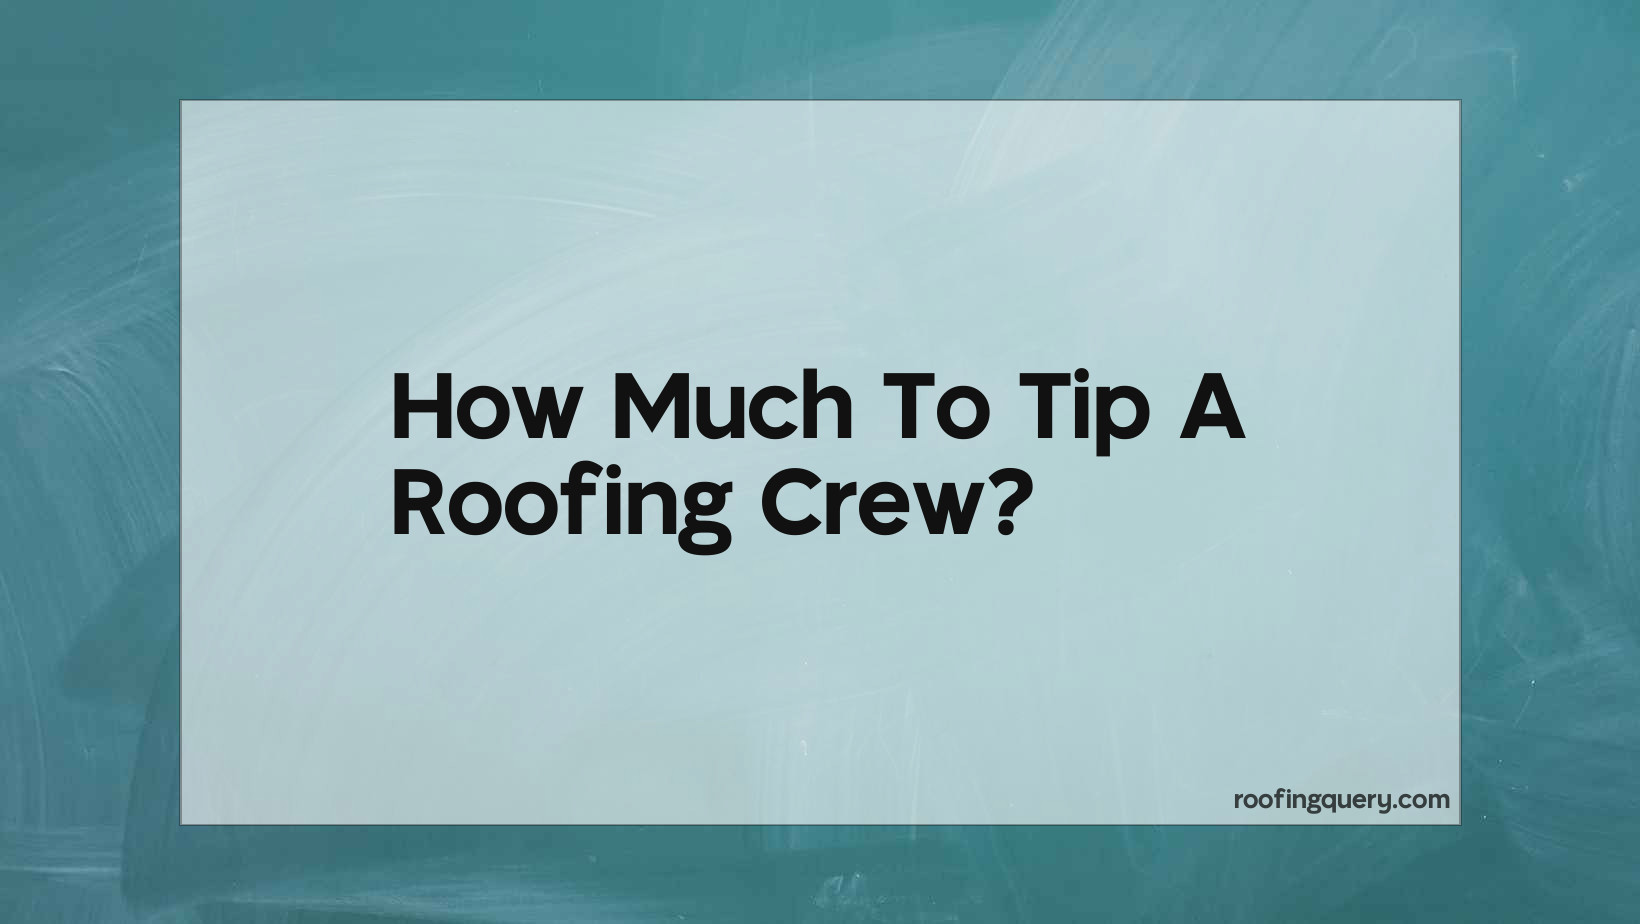 How Much To Tip A Roofing Crew?